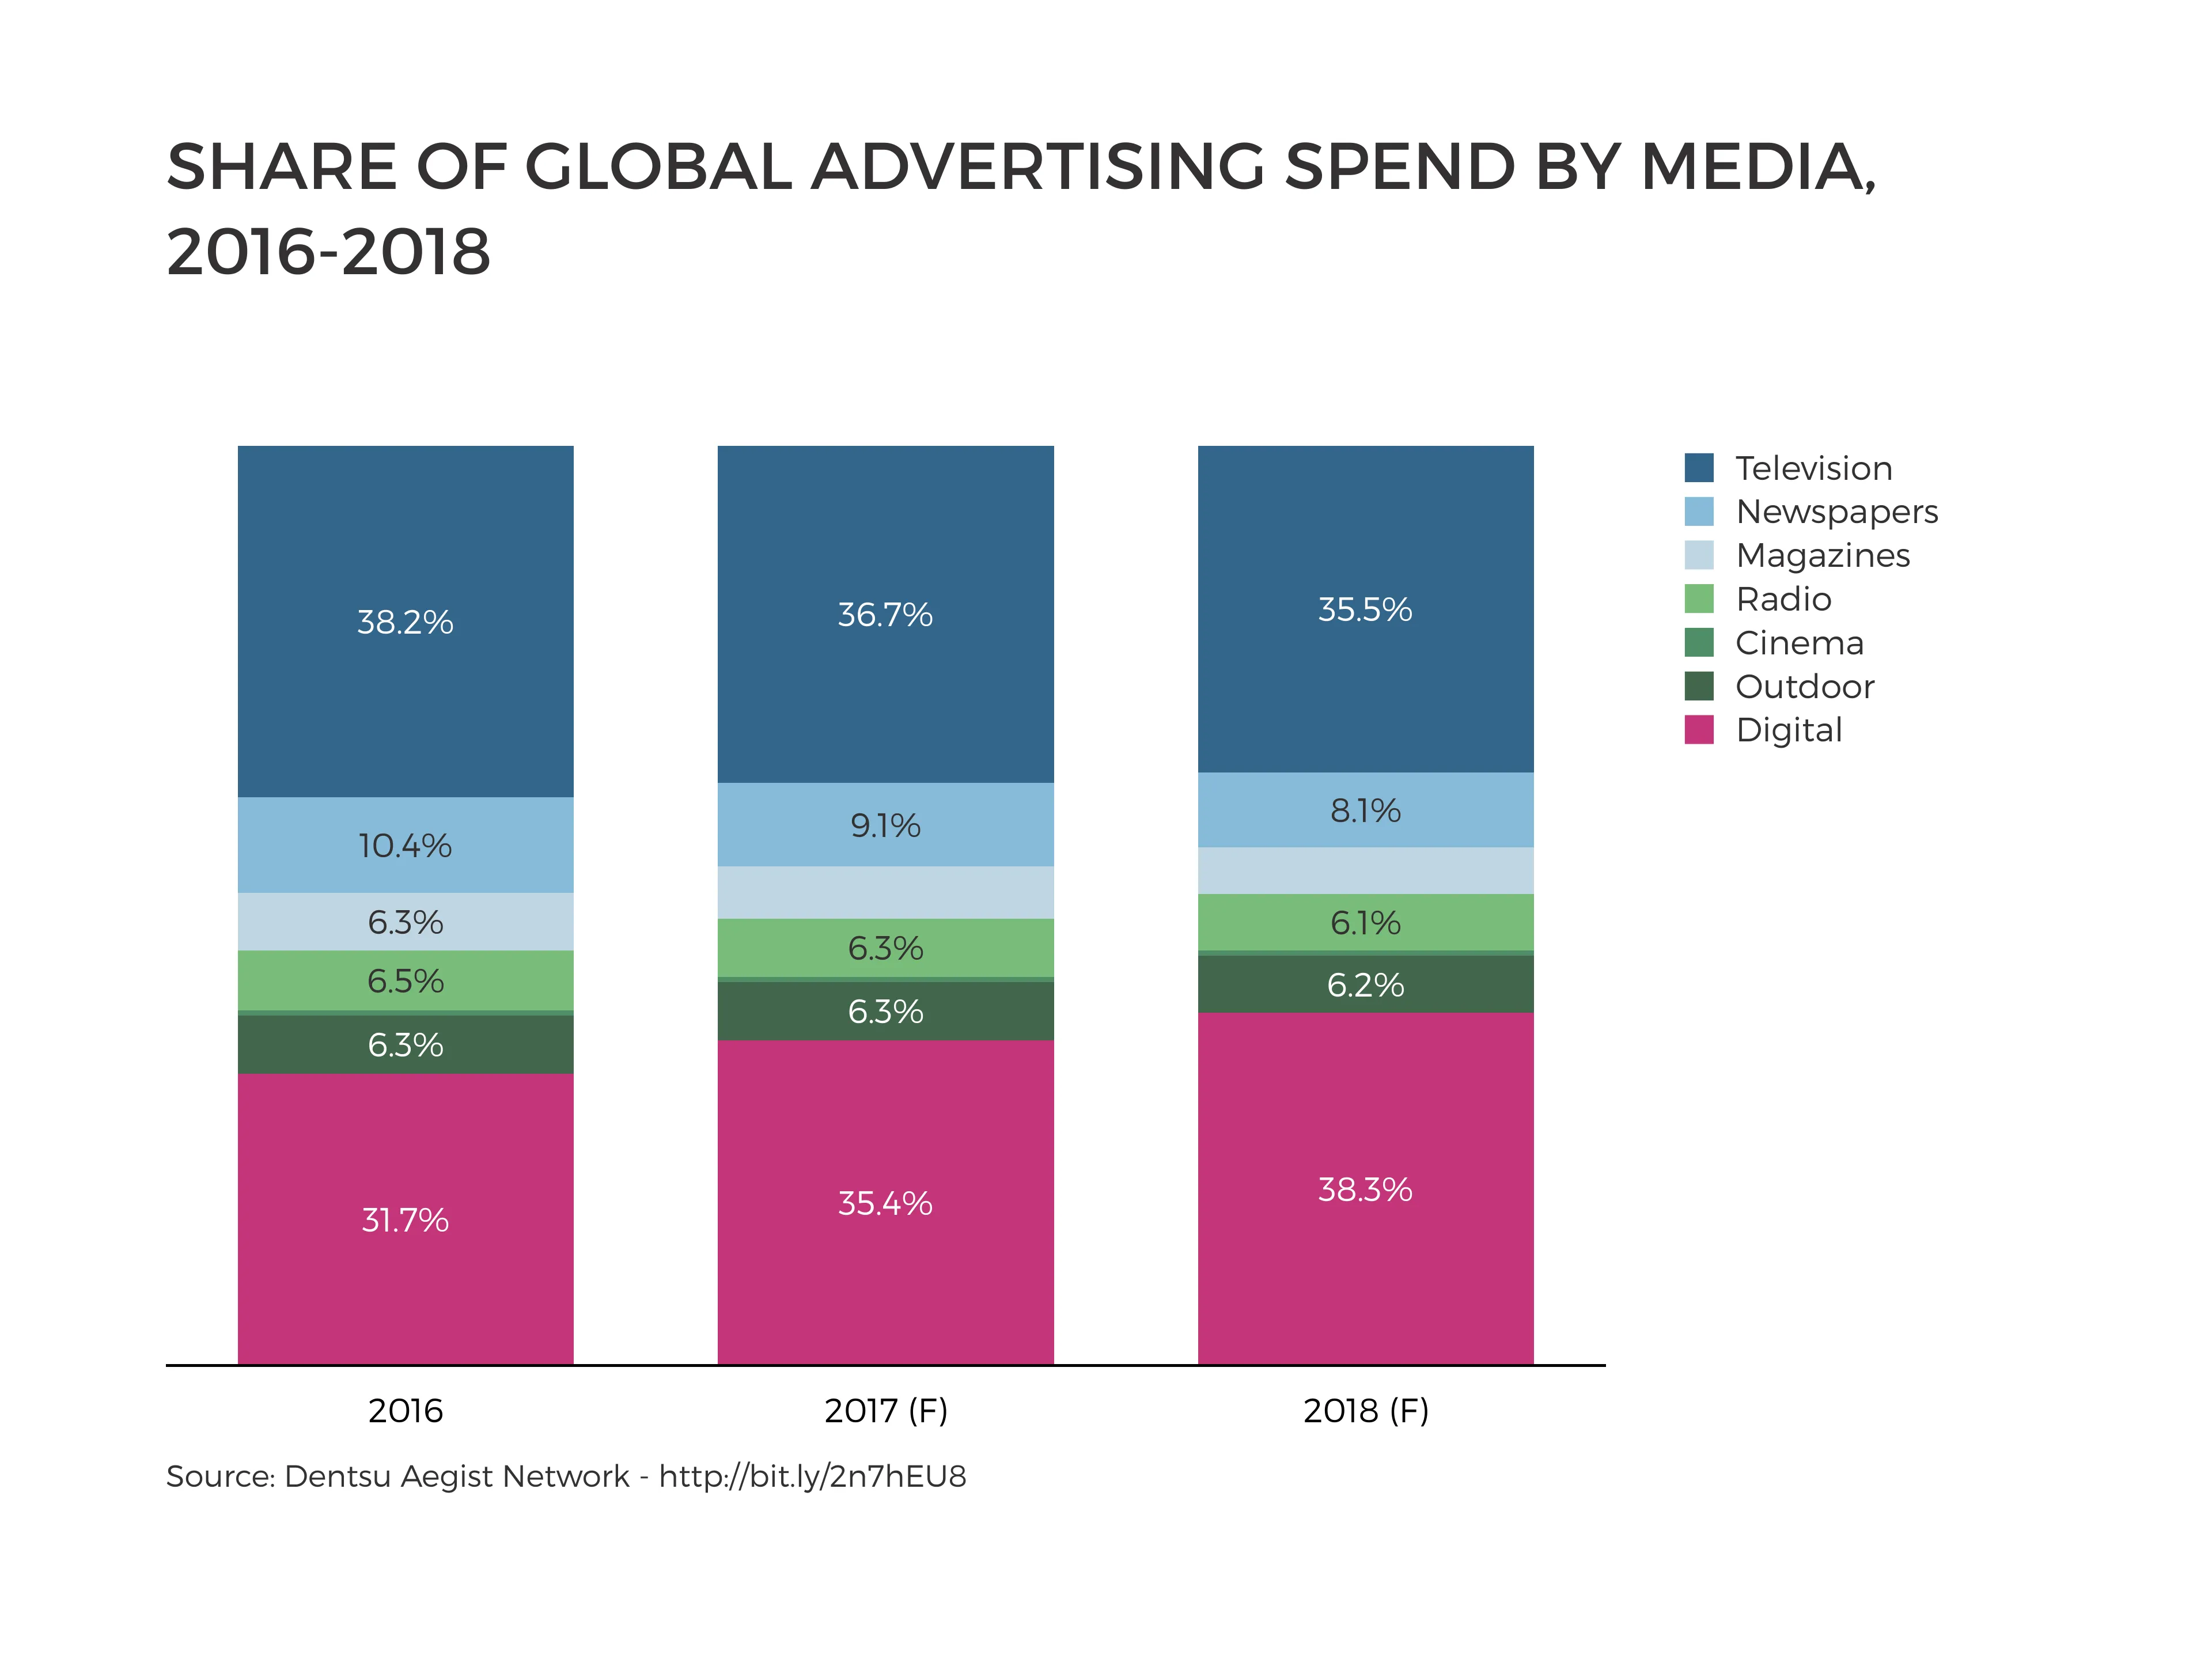 SHARE OF GLOBAL ADVERTISING SPEND BY MEDIA, 2016-2018